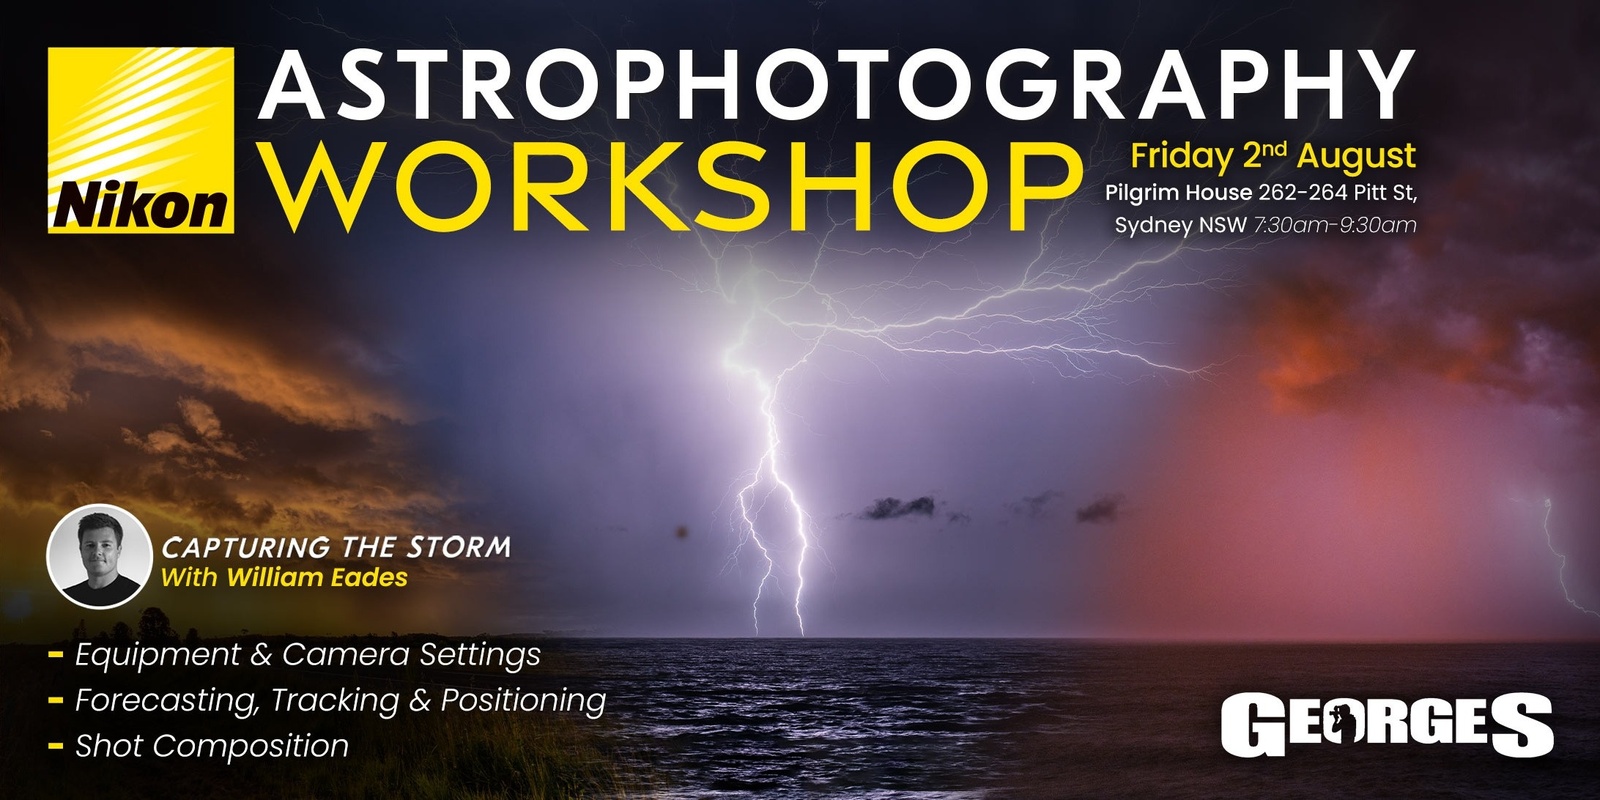 Banner image for ASTROPHOTOGRAPHY WORKSHOP - Capturing The Storm with Will Eades 